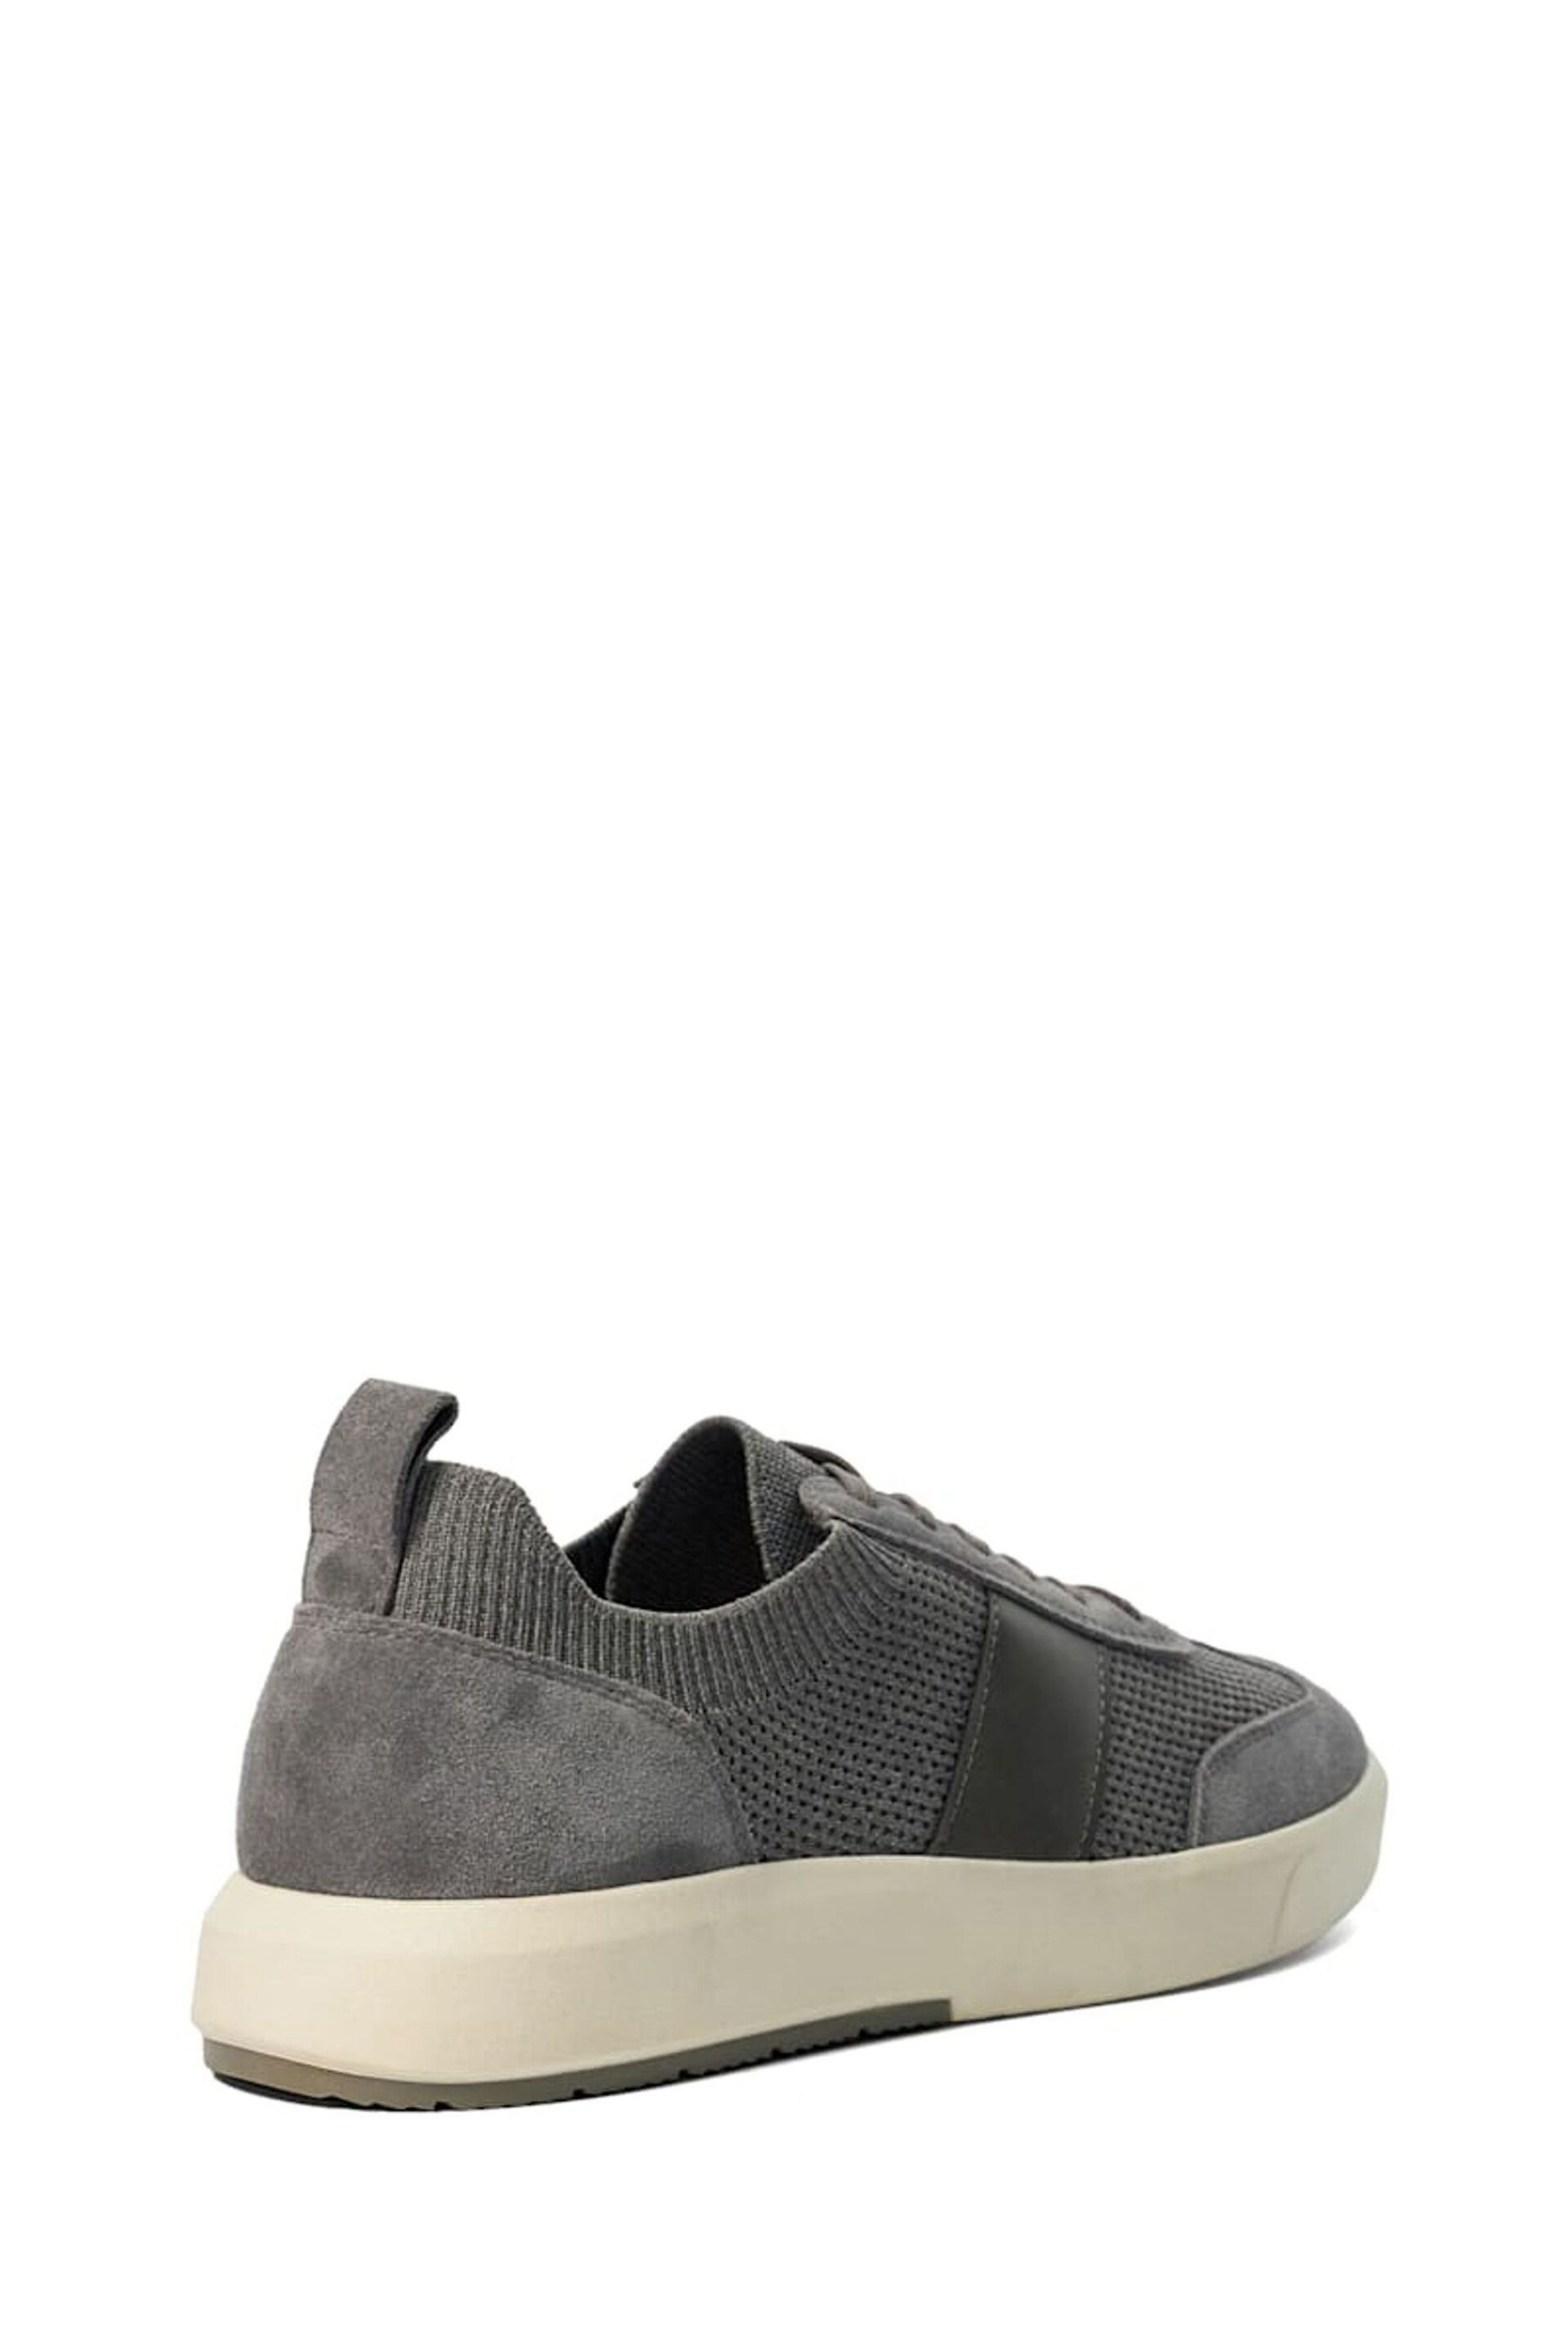 Dune London Grey Trailing Knitted Runner Trainers - Image 4 of 5